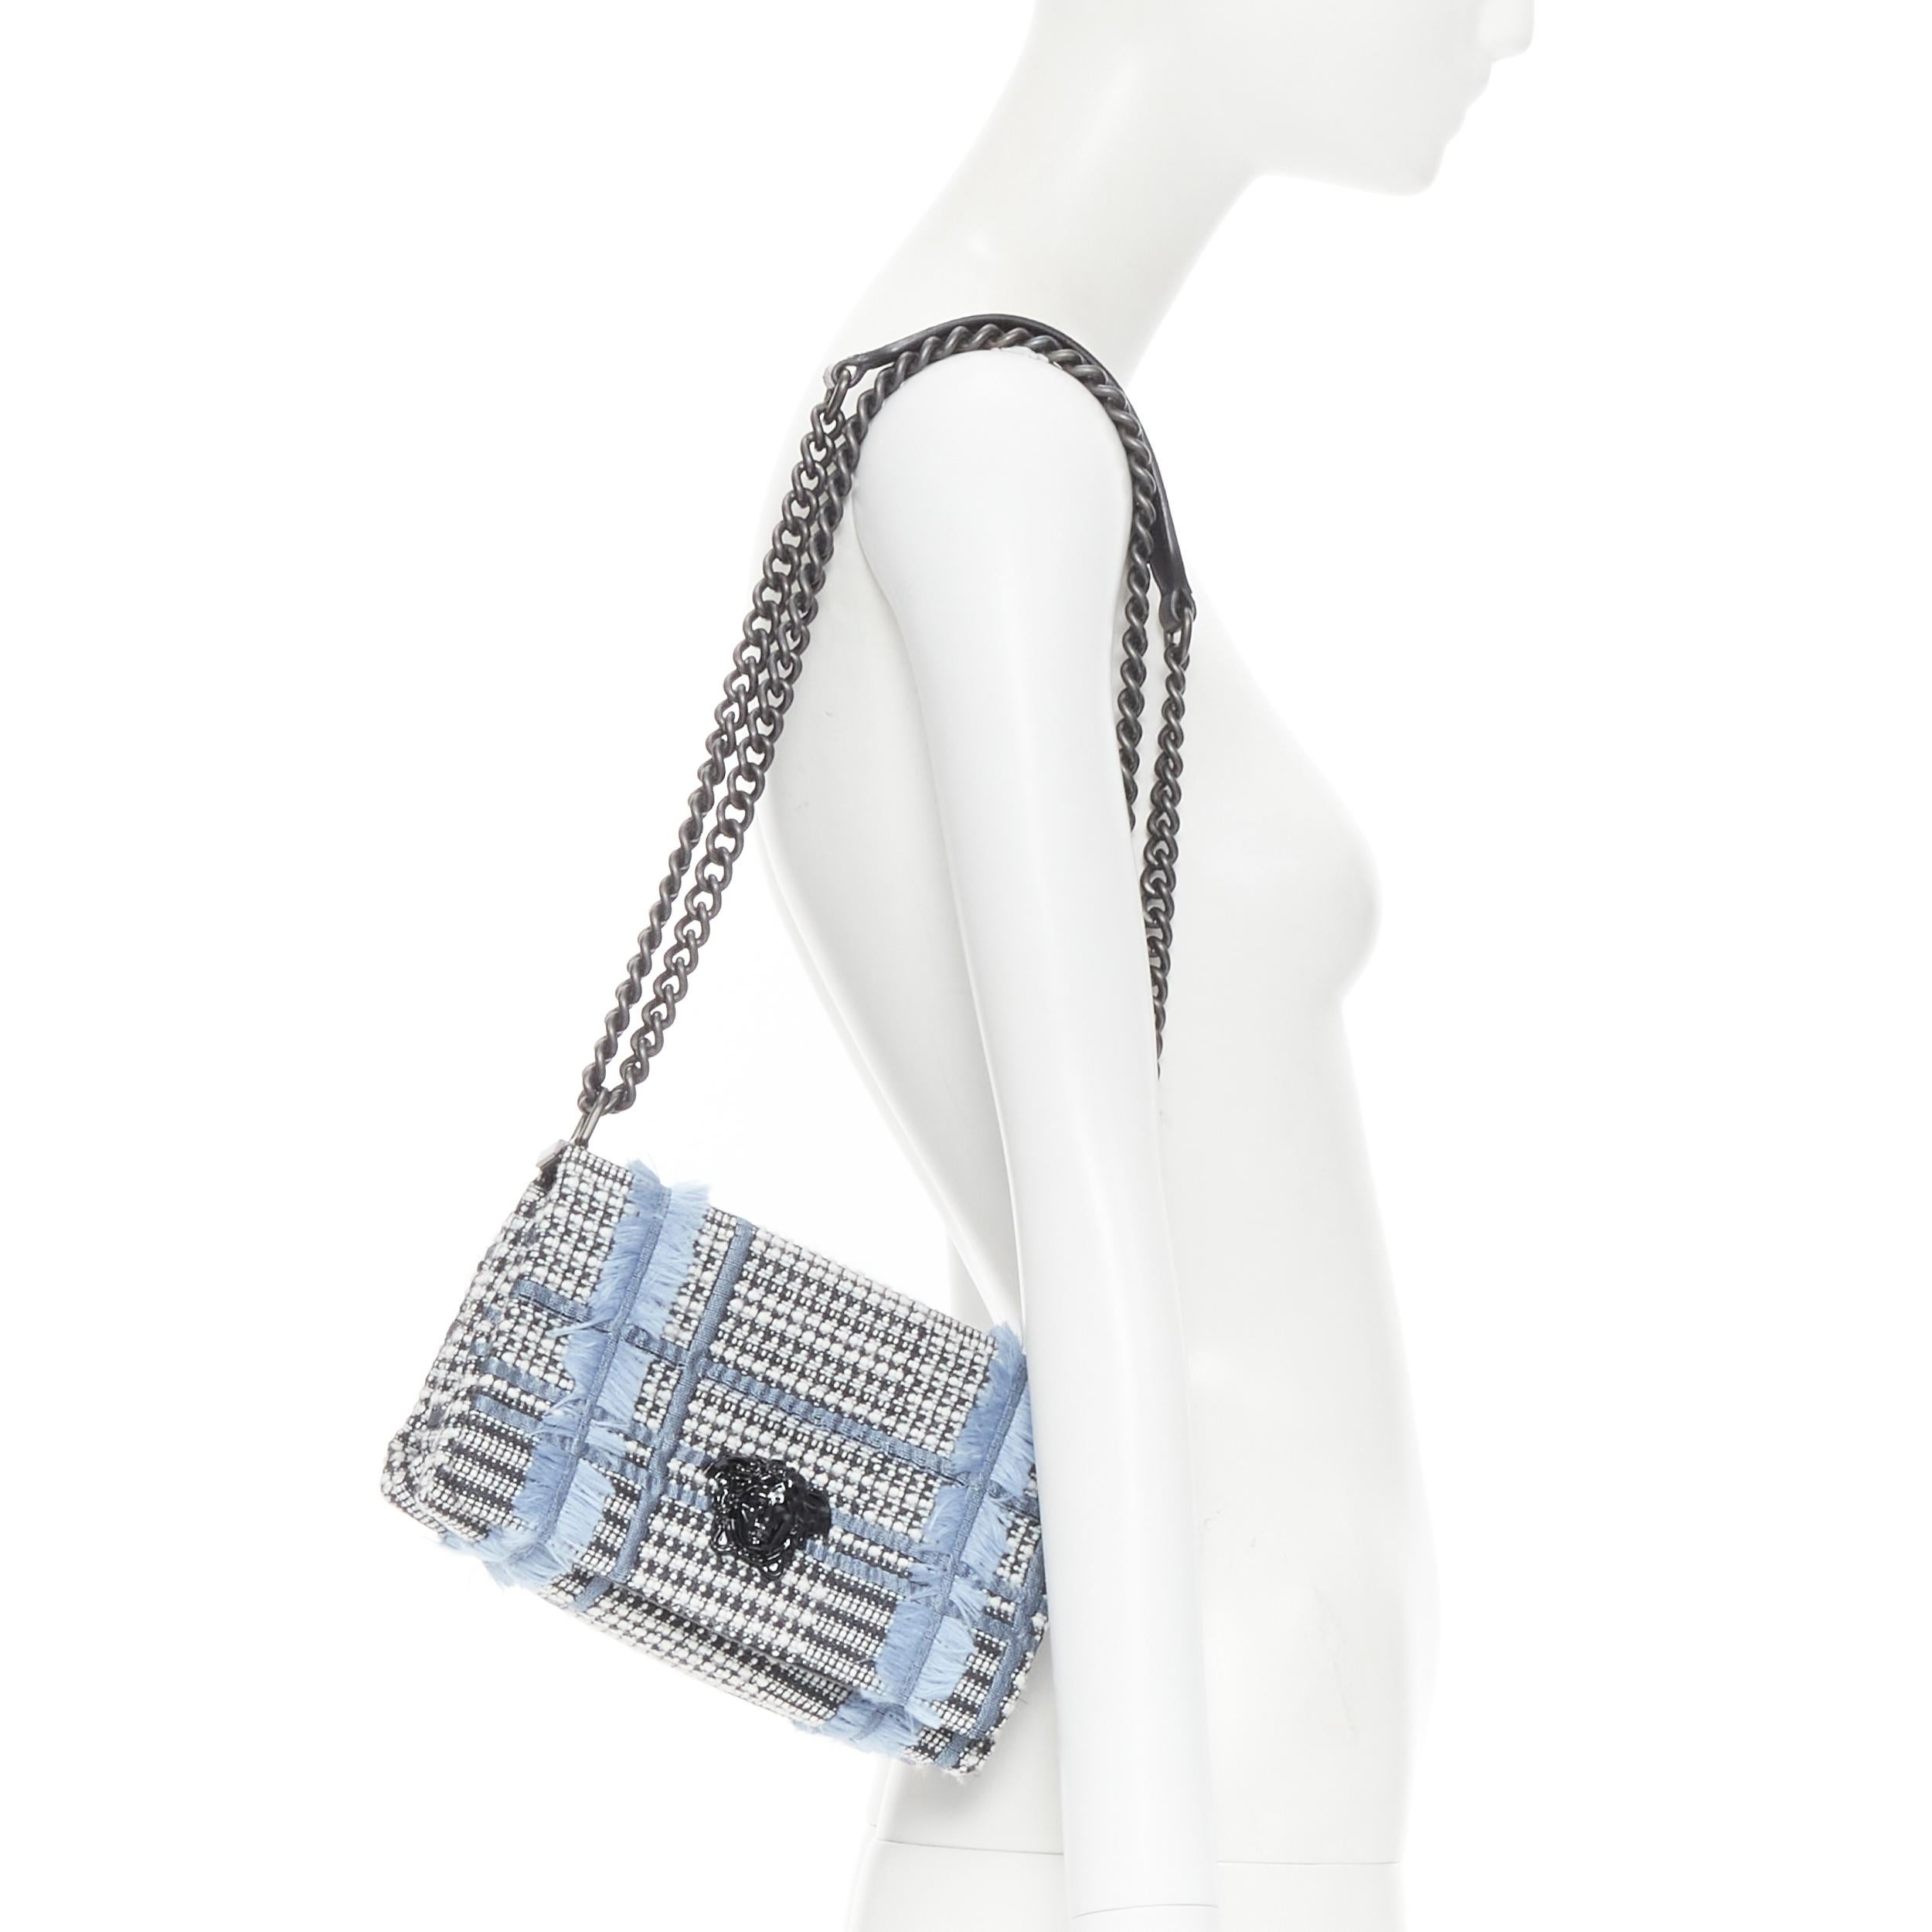 new VERSACE Palazzo Medusa grey blue tweed chunky chain crossbody flap bag 
Reference: TGAS/B01136 
Brand: Versace 
Designer: Donatella Versace 
Model: Palazzo Flap shoulder bag 
Material: Tweed 
Color: Blue 
Pattern: Check 
Closure: Clasp 
Extra